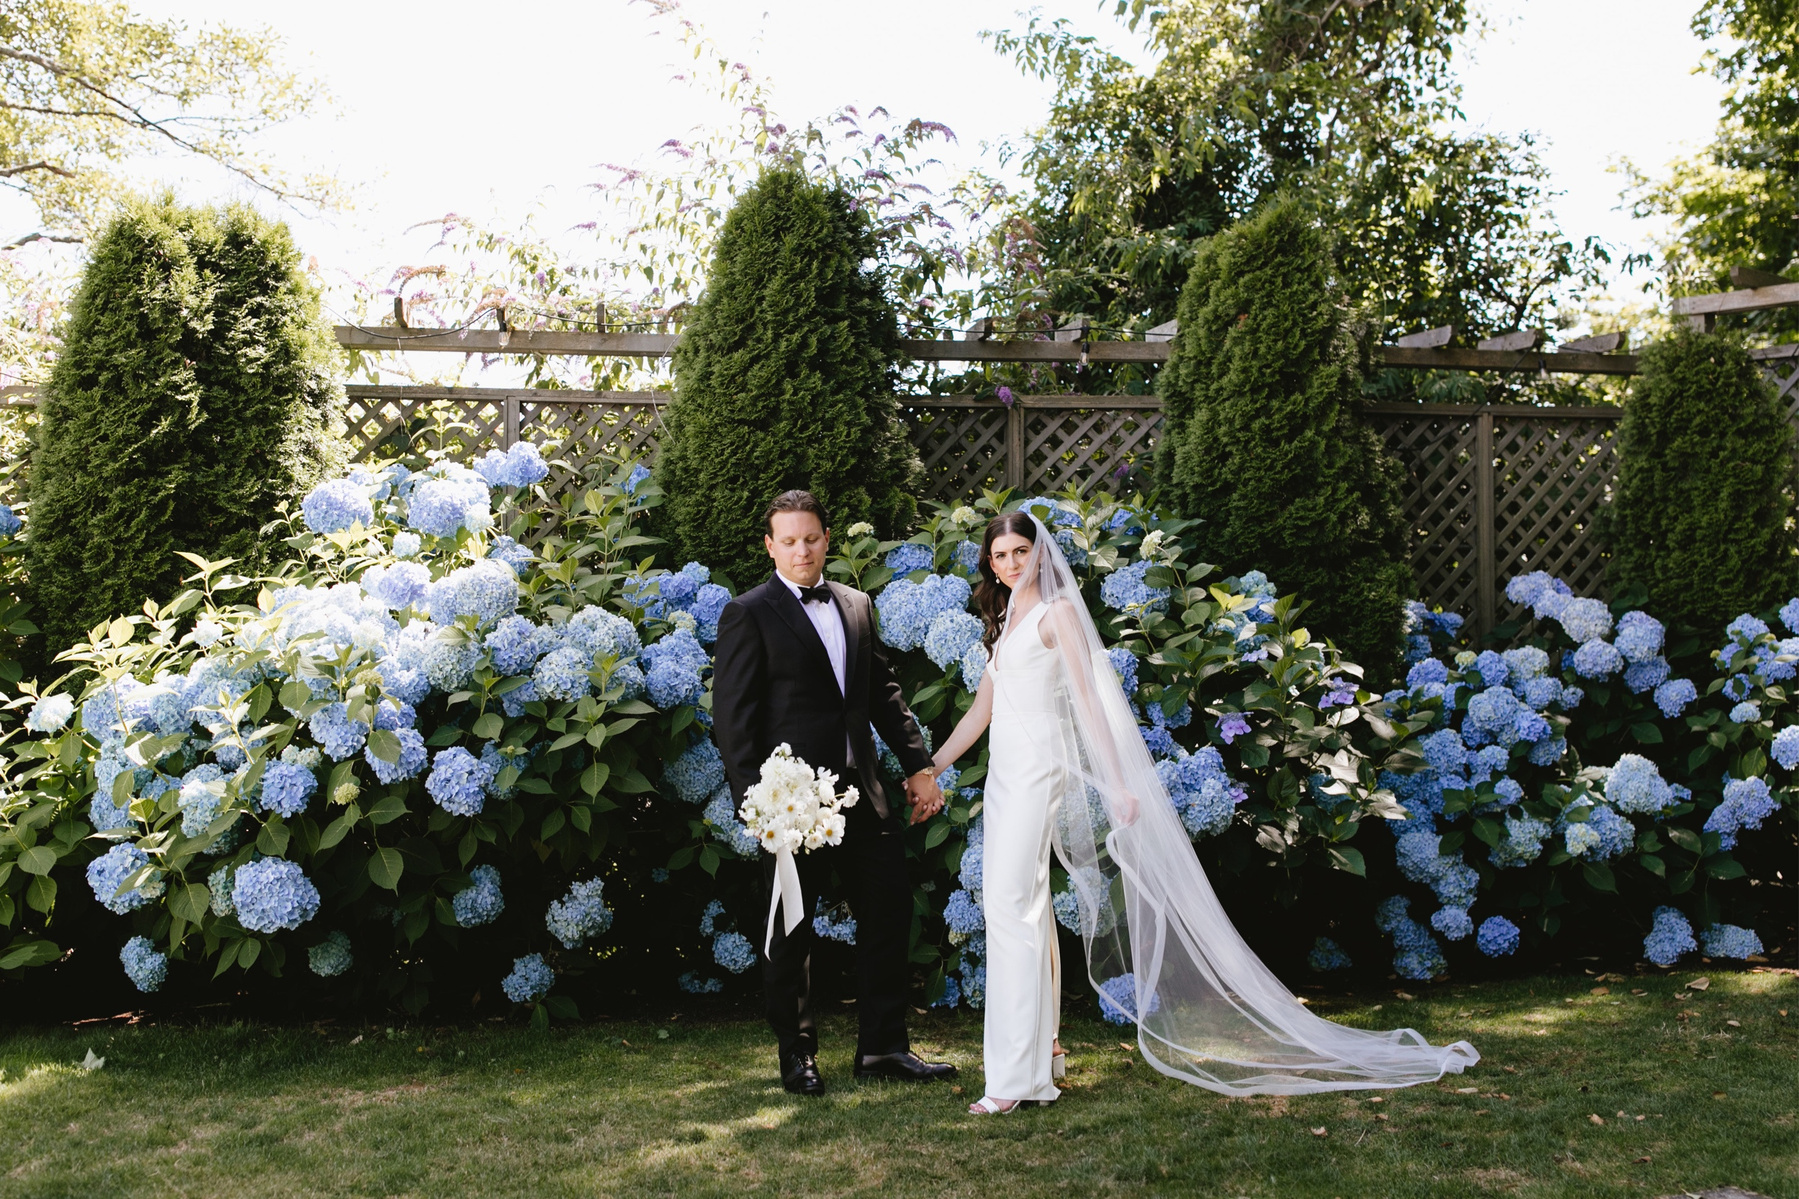 Classic black tie wedding with whimsical florals by Iris & Fig and planning by Eventful Moments. Breathtaking classic bridal details and decor with a view of the Seattle Sound and Downtown from The Admiral's House